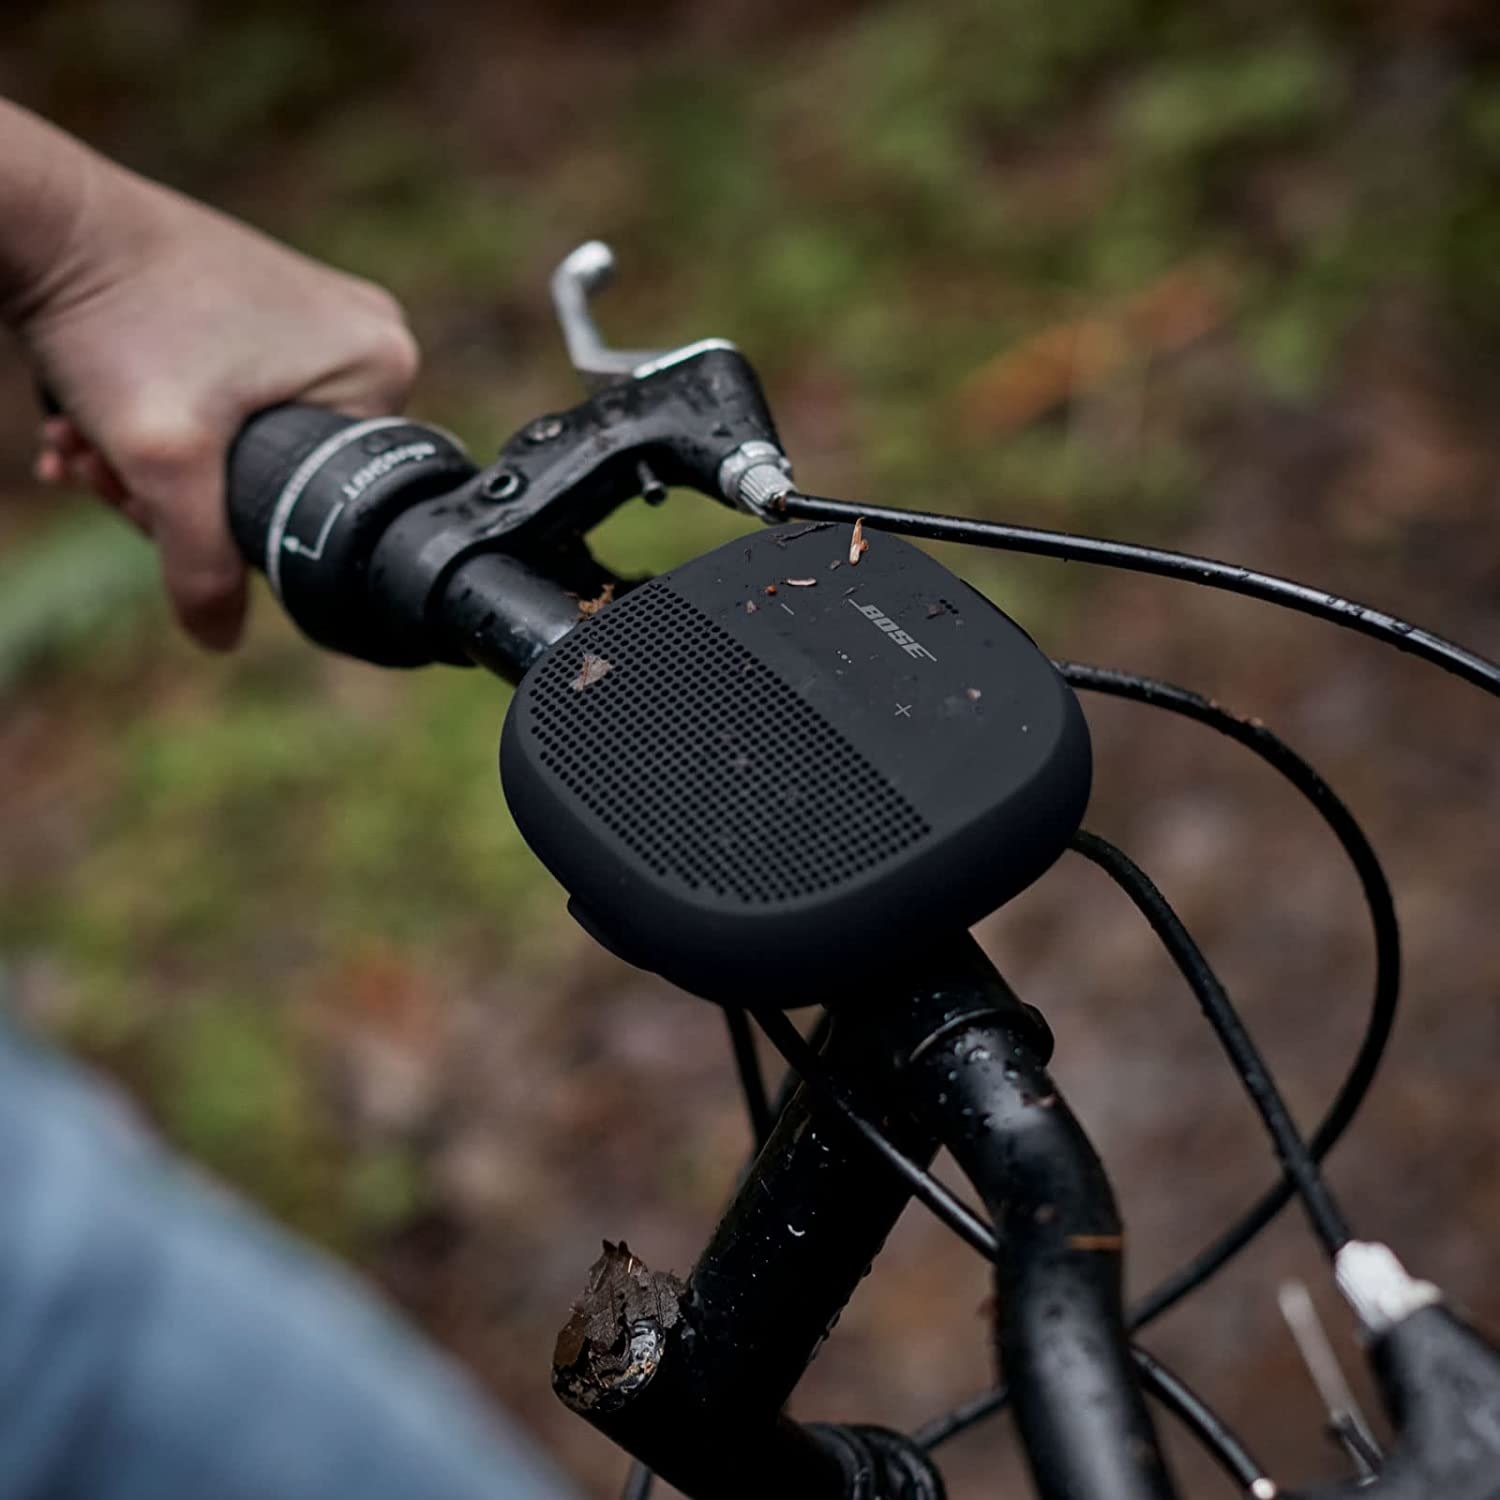 the small square speaker attached to mountain bike handlebars